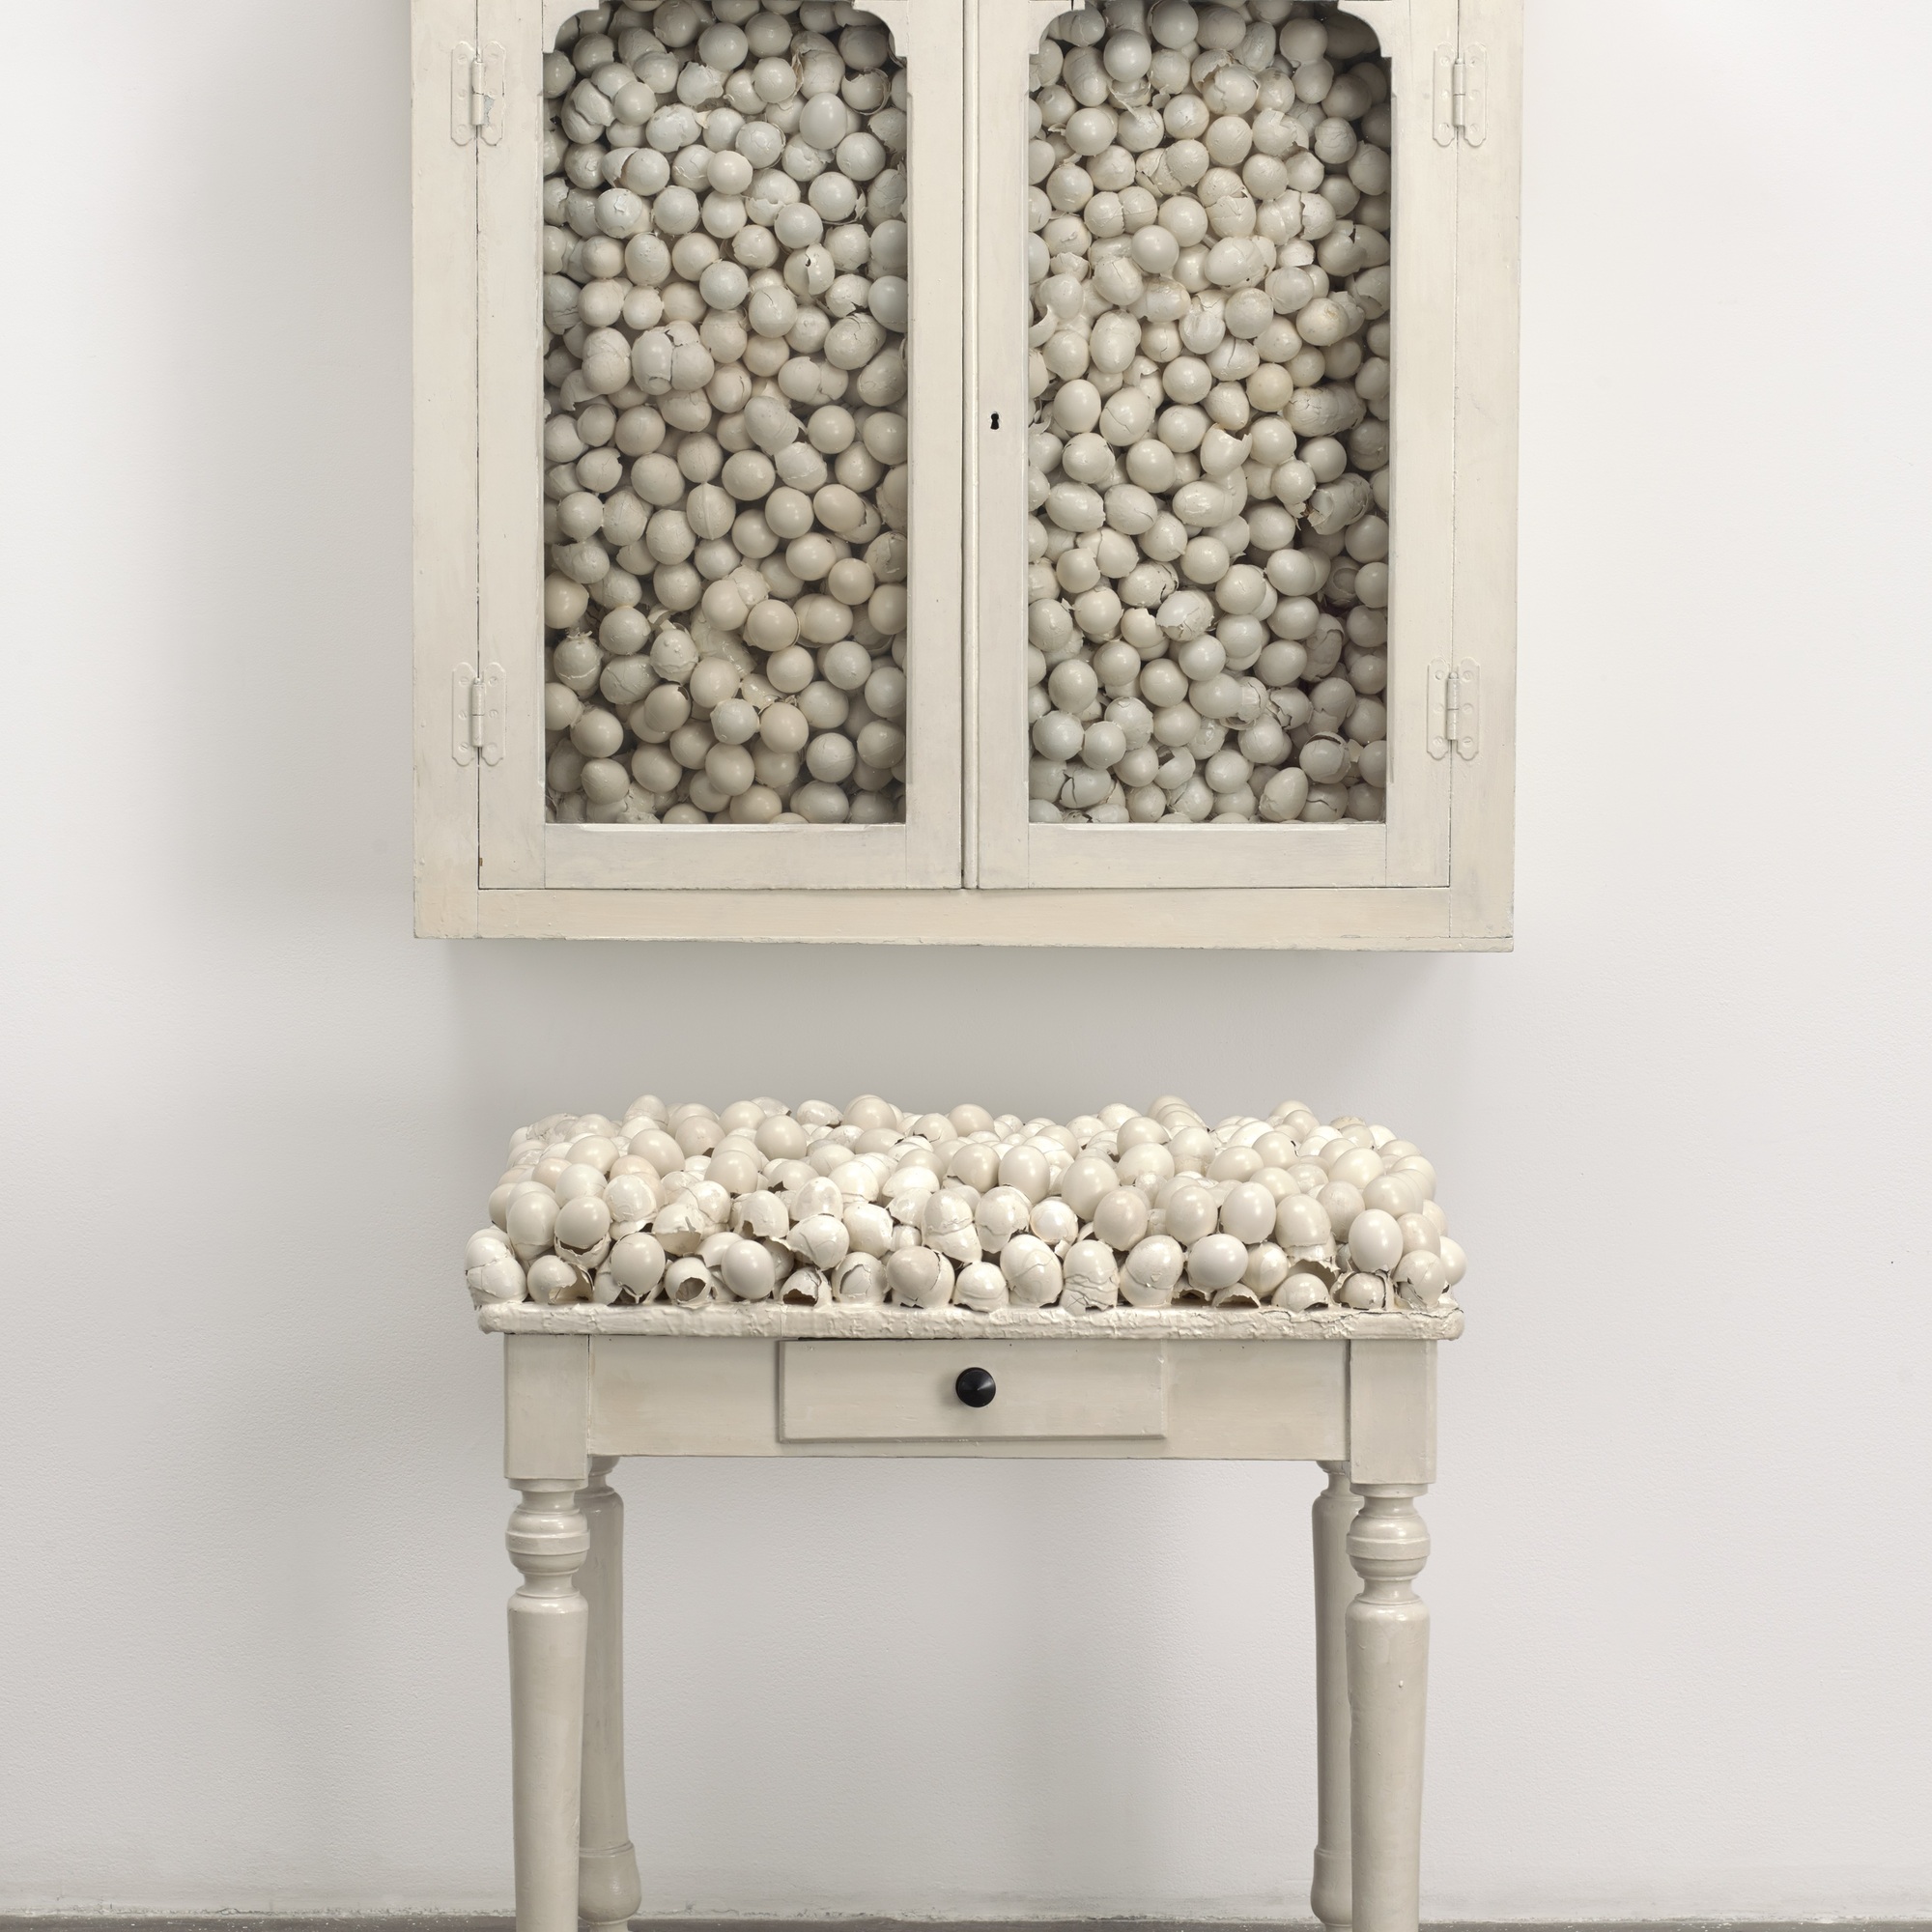 Marcel Broodthaers. Armoire blanche et table blanche (White Cabinet and White Table). 1965. Painted cabinet, table, and eggshells; cabinet 33 7/8 x 32 1/4 x 24 1/2″ (86 x 82 x 62 cm), table 41 x 39 3/8 x 15 3/4″ (104 x 100 x 40 cm). The Museum of Modern Art, New York. Fractional and promised gift of Jo Carole and Ronald S. Lauder. © 2015 Estate of Marcel Broodthaers/Artists Rights Society (ARS), New York/SABAM, Brussels